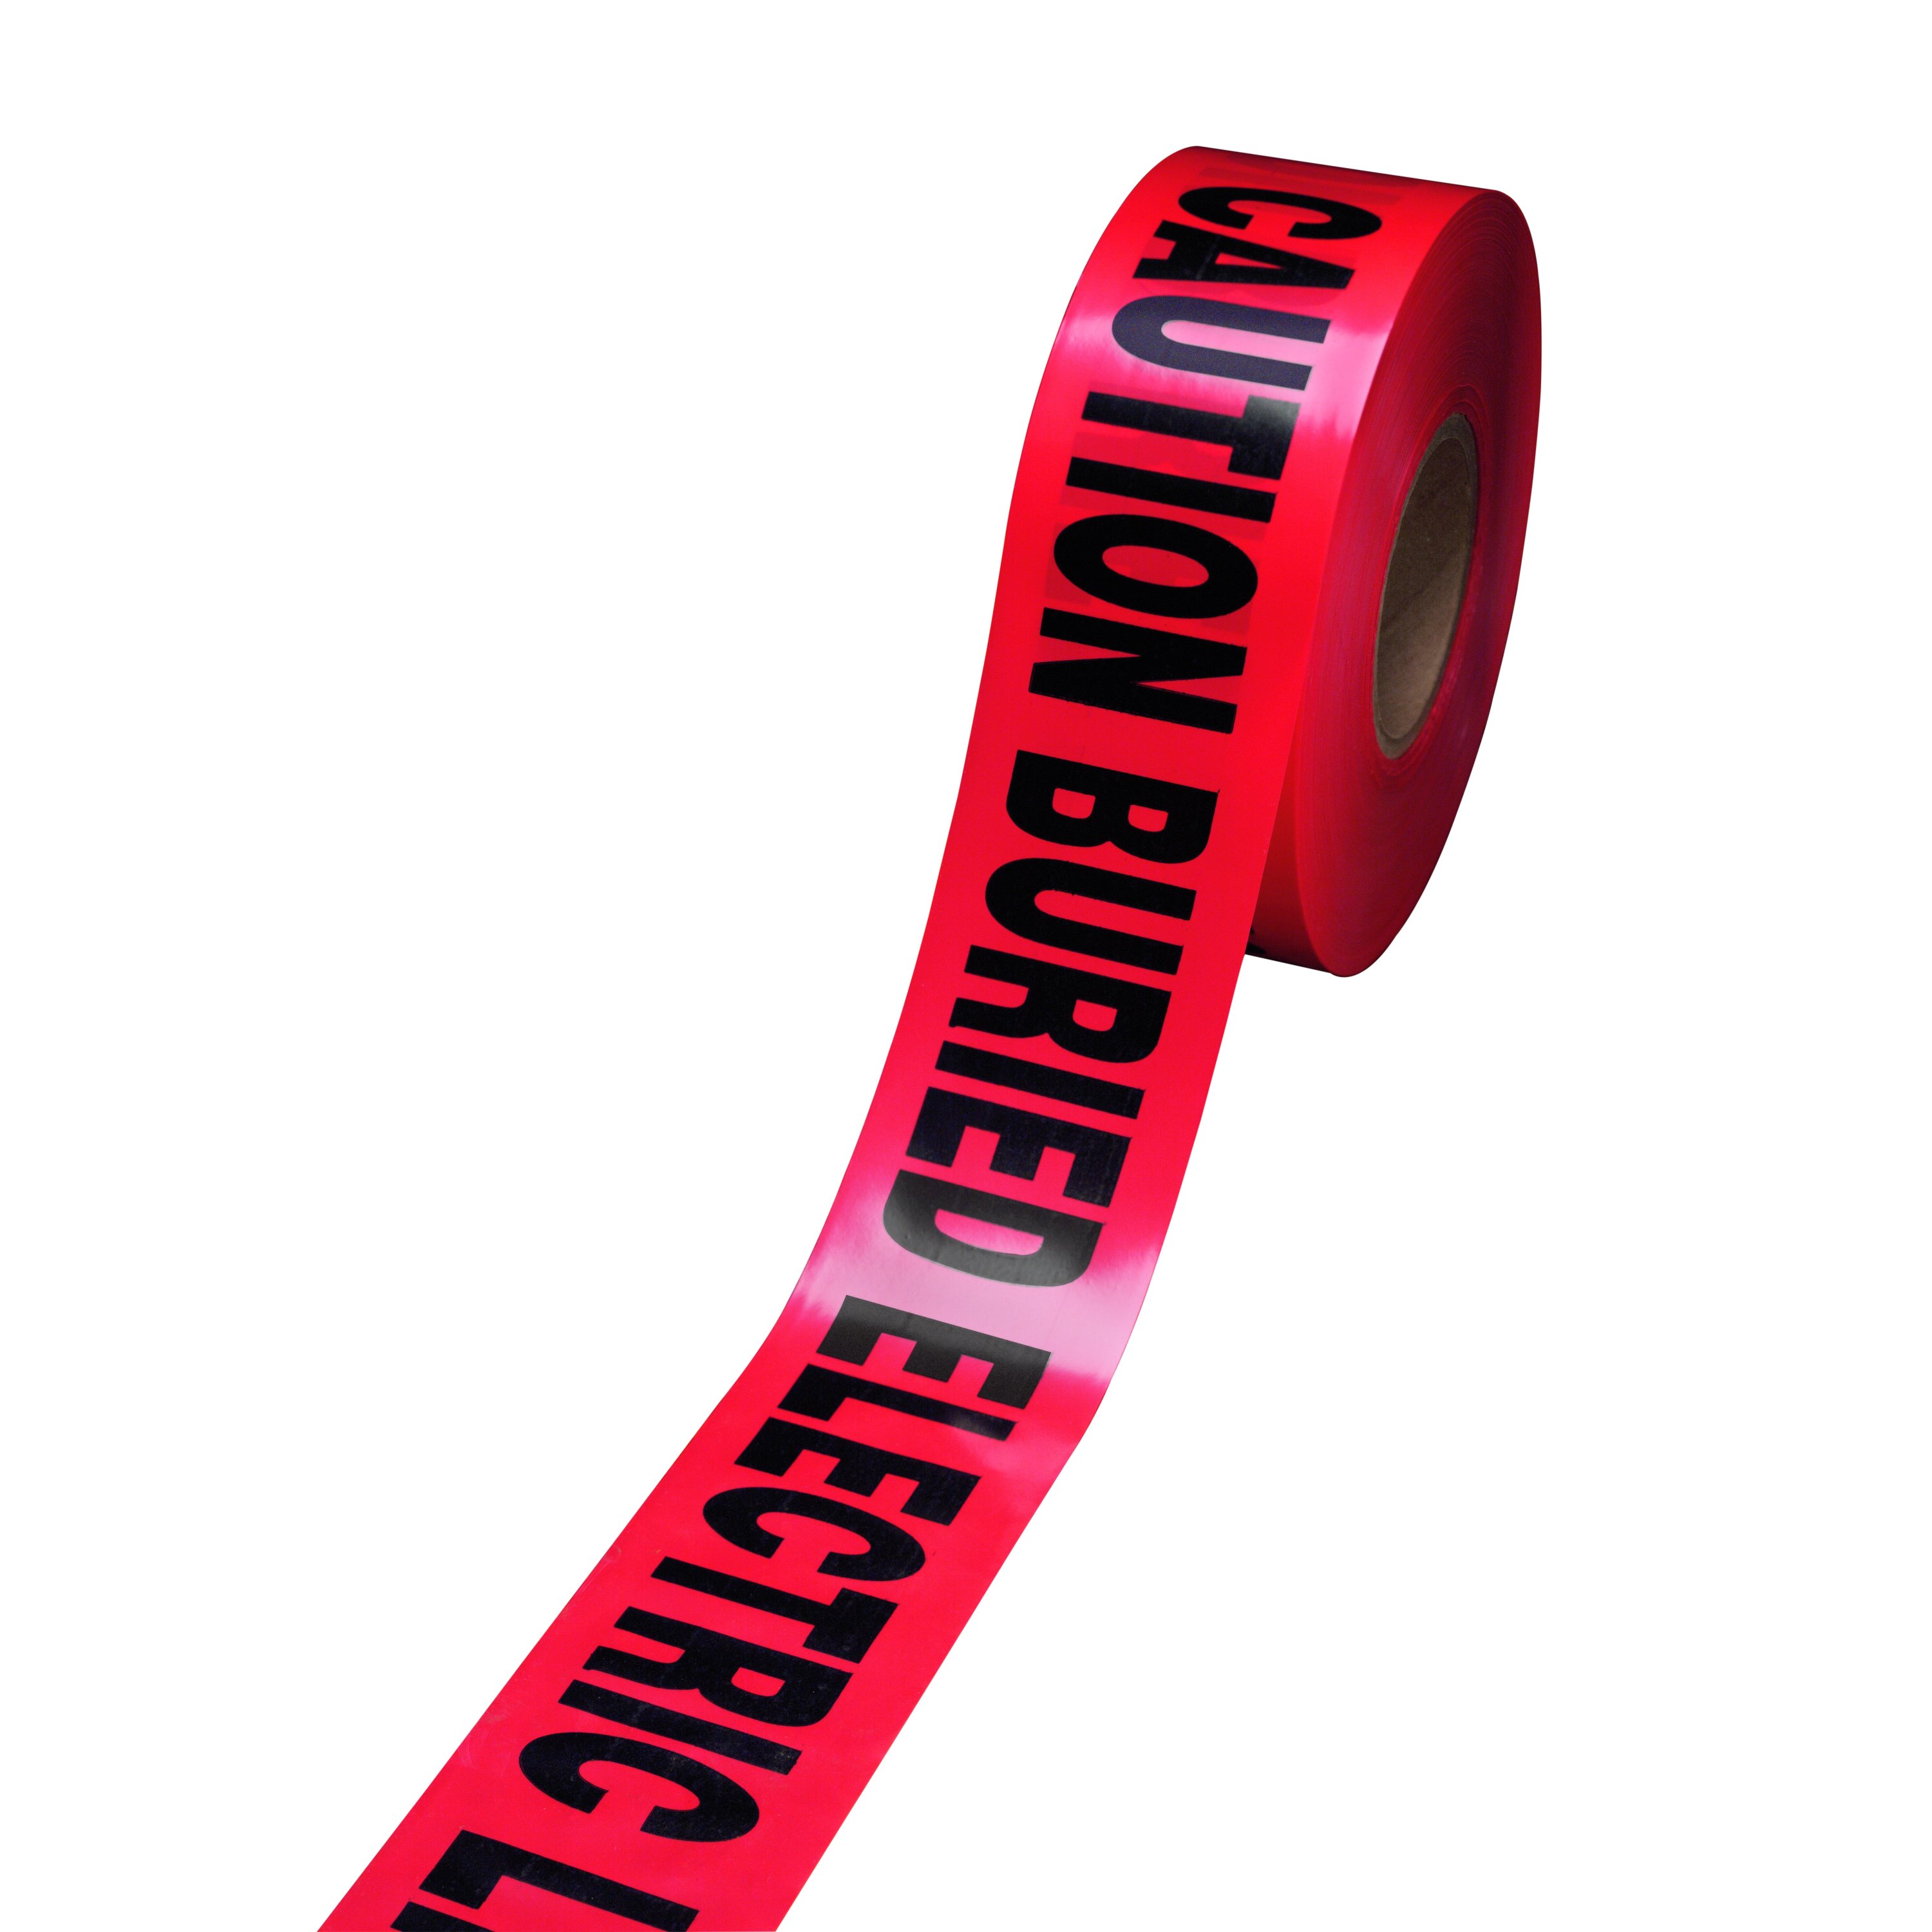 Scotch® Buried Barricade Tape 303, CAUTION BURIED ELECTRIC LINE BELOW, 3
in x 300 ft, Red, 16 rolls/Case